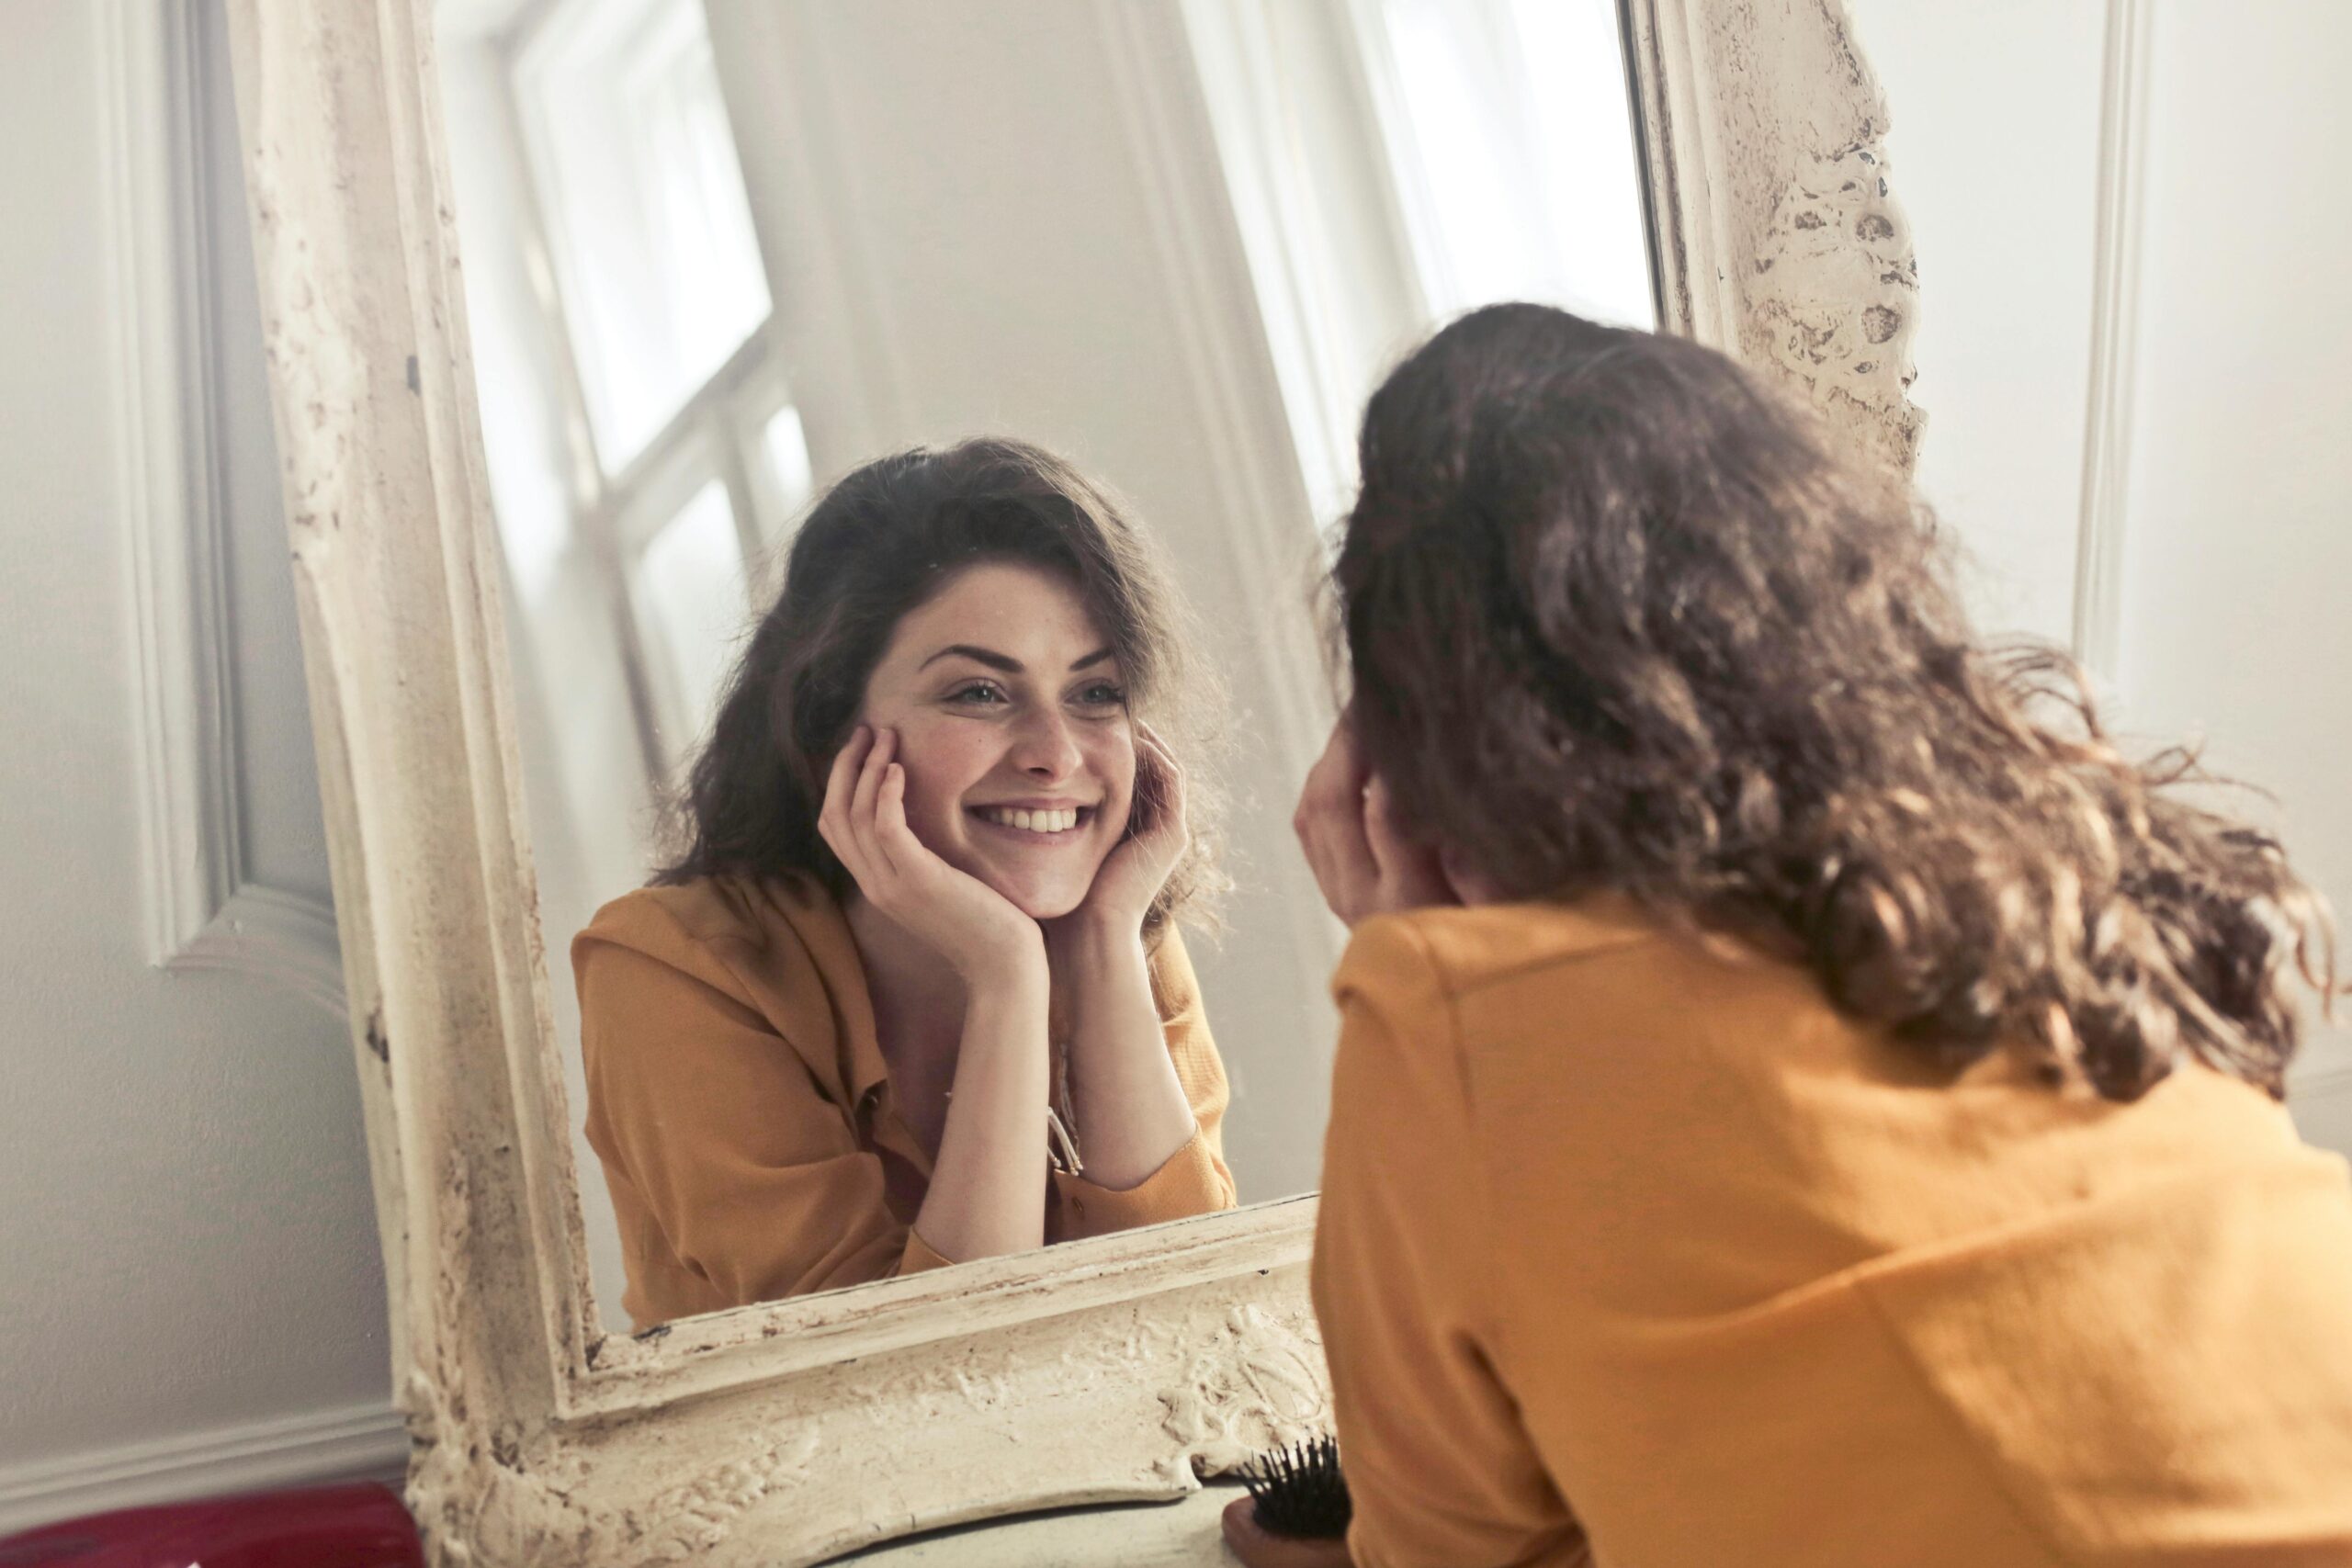 A woman with curly hair smiles authentically while looking at herself in a large, ornate mirror. She is wearing a mustard-colored top and has her hands resting on her cheeks.